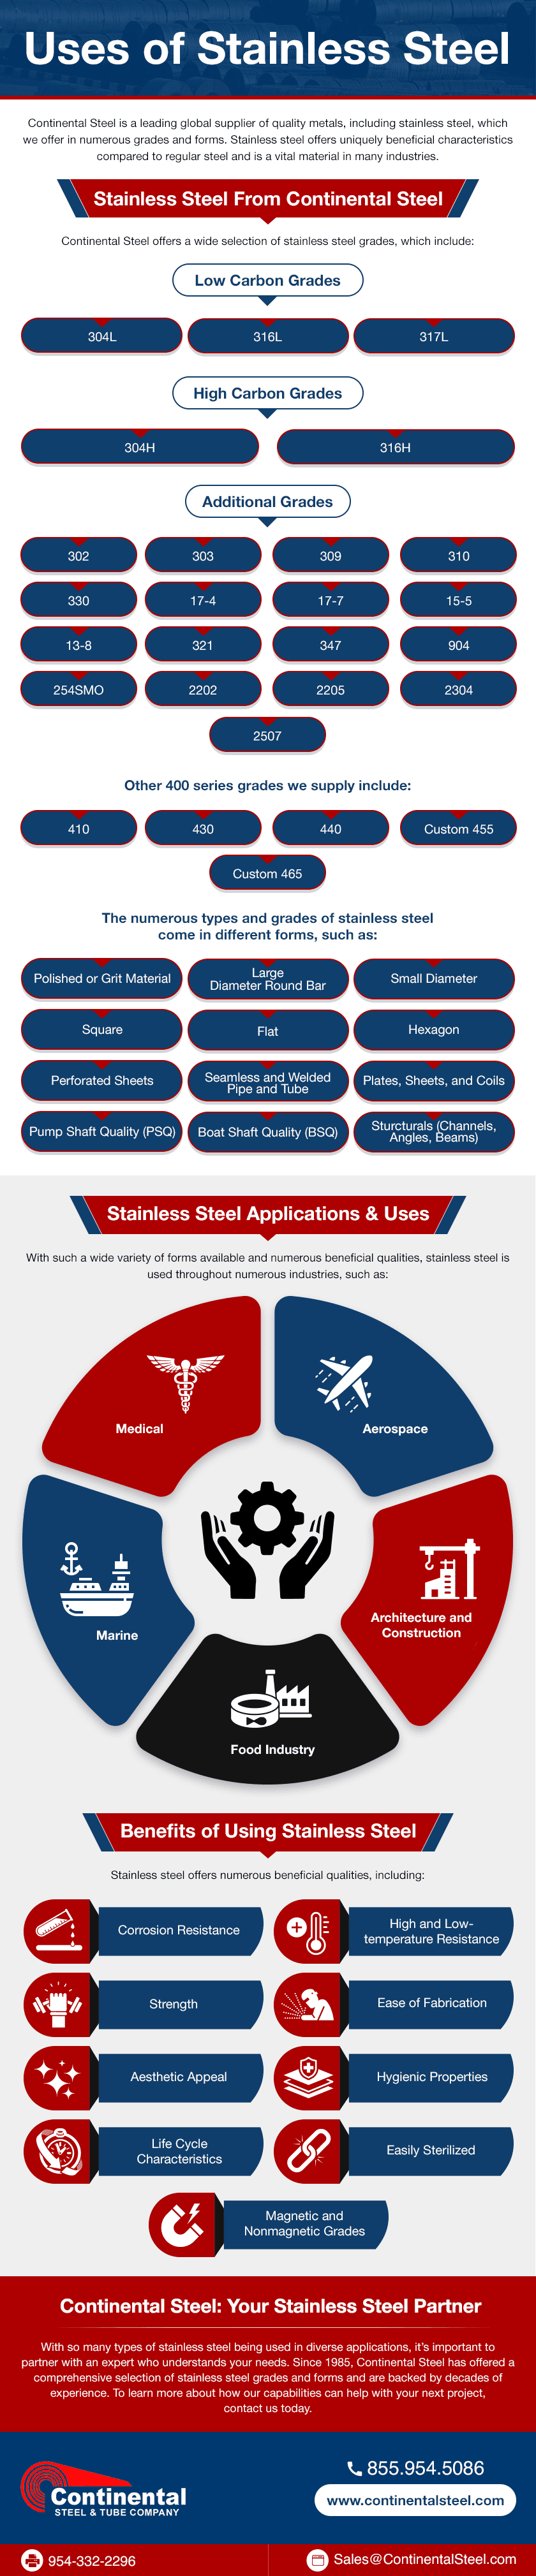 Uses of Stainless Steel